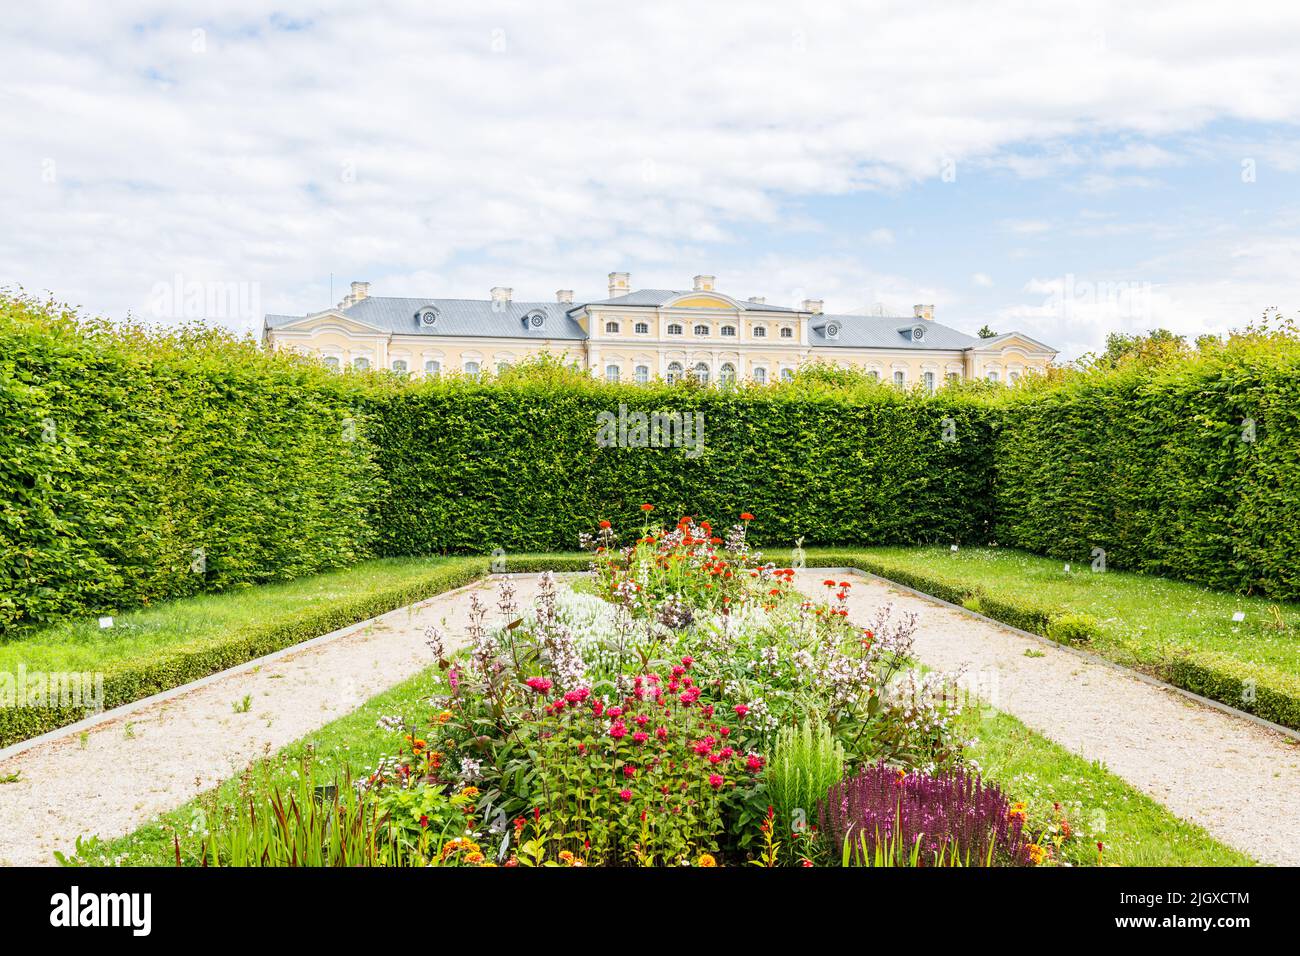 Gardens of Rundale palace in Latvia. Famous attraction place for tourists Stock Photo